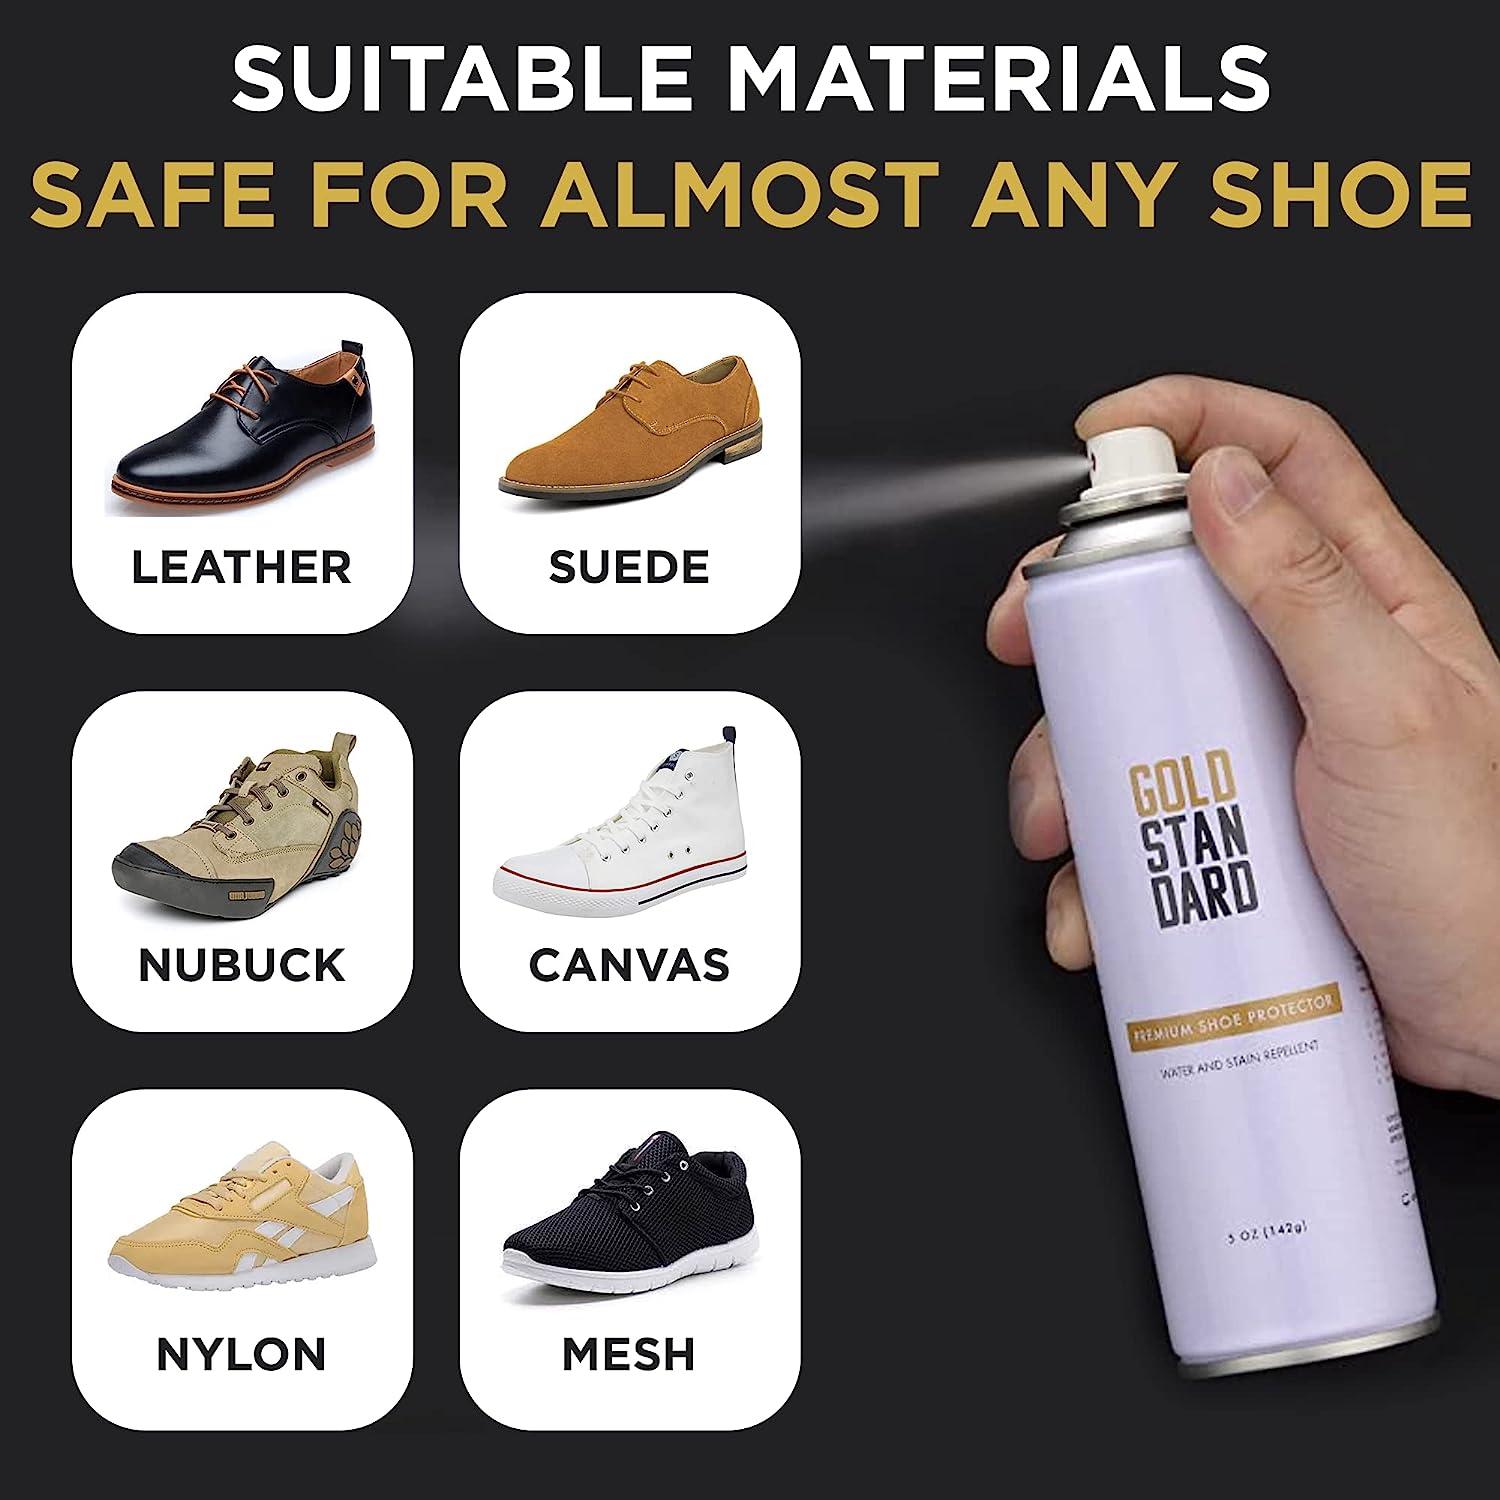 Gold Standard Shoe Cleaner Essentials - Sneaker Cleaner Easily Removes Dirt  from Leather, Canvas, White Sneakers & More